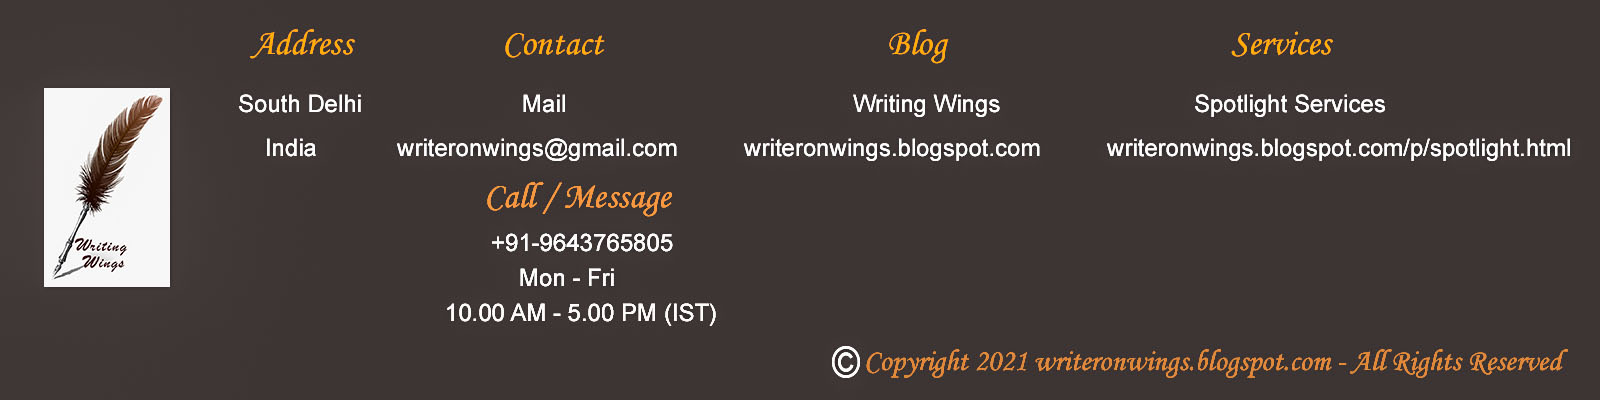 Footer | Contact Addresses | Writing Wings